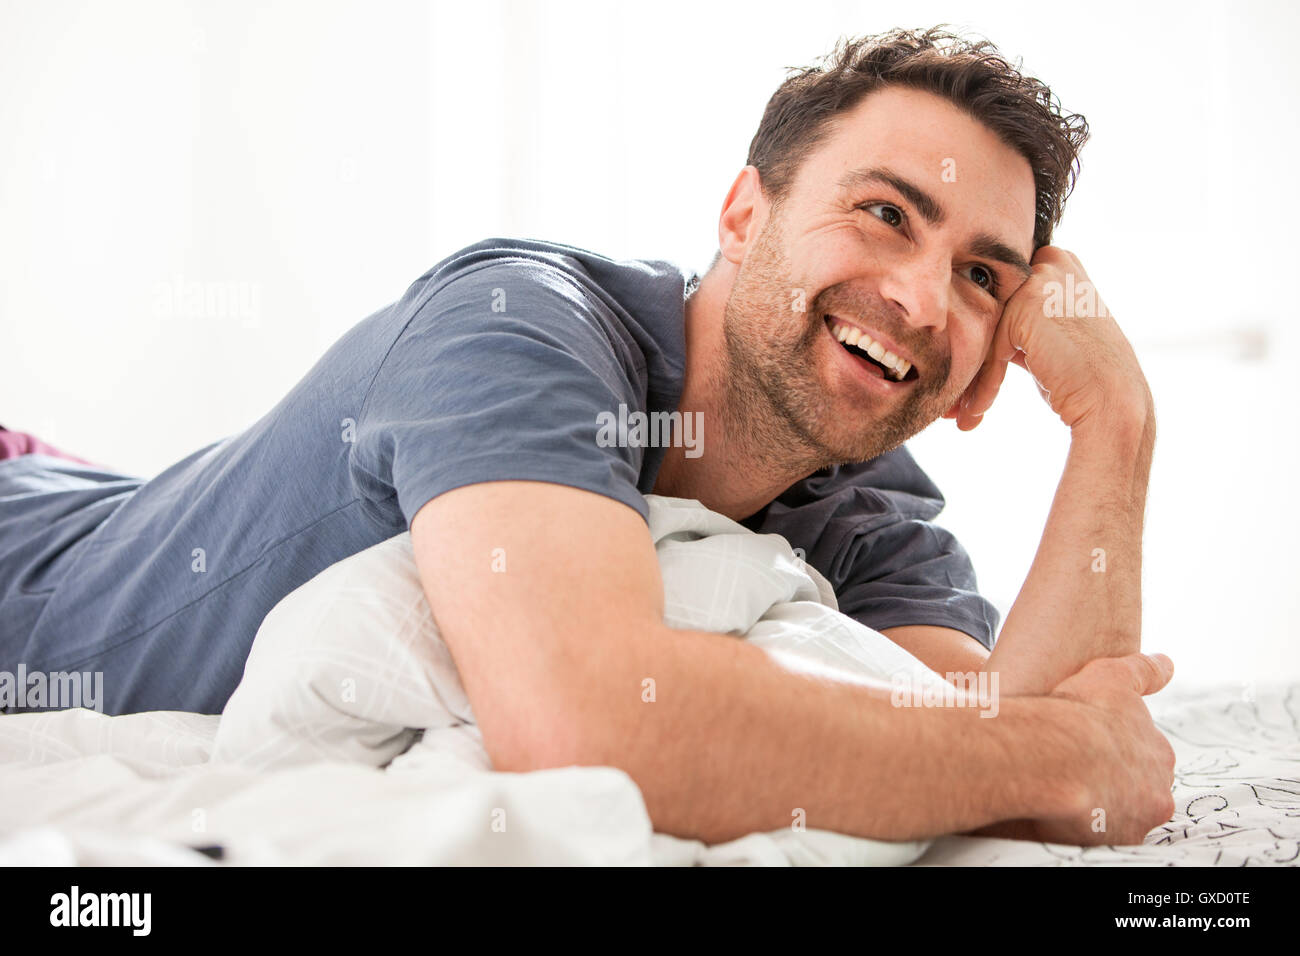 Man lying on bed, resting on elbow looking away smiling Stock Photo